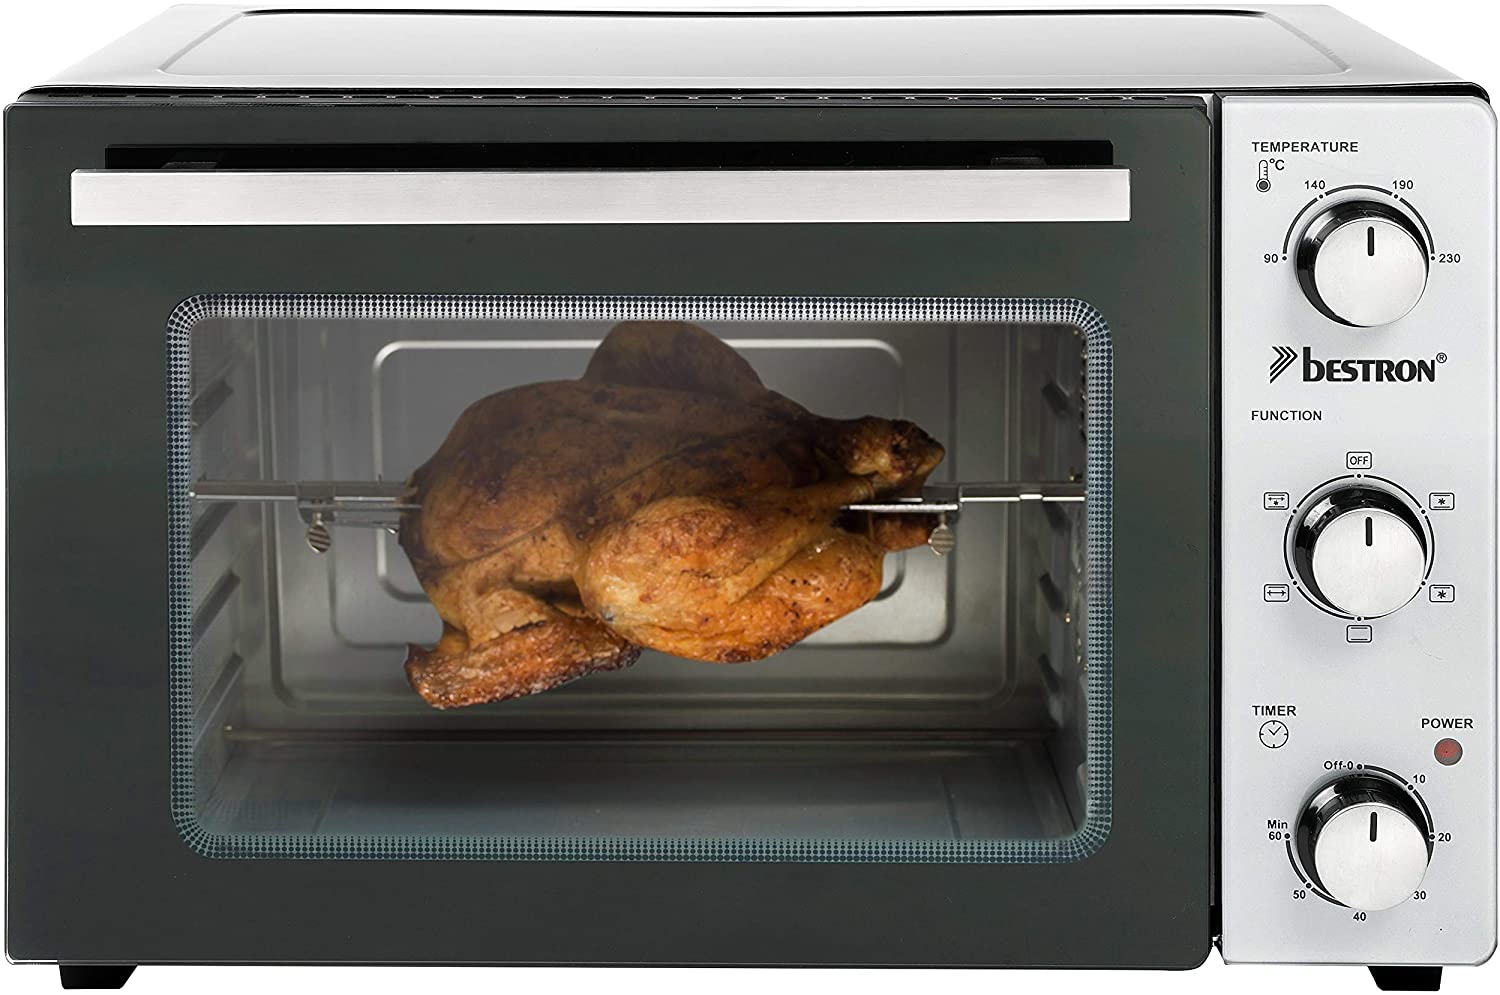 Bestron AOV31 2-in-1 Mini Oven with Rotisserie 31 Litre 1500W Stainless Steel Black